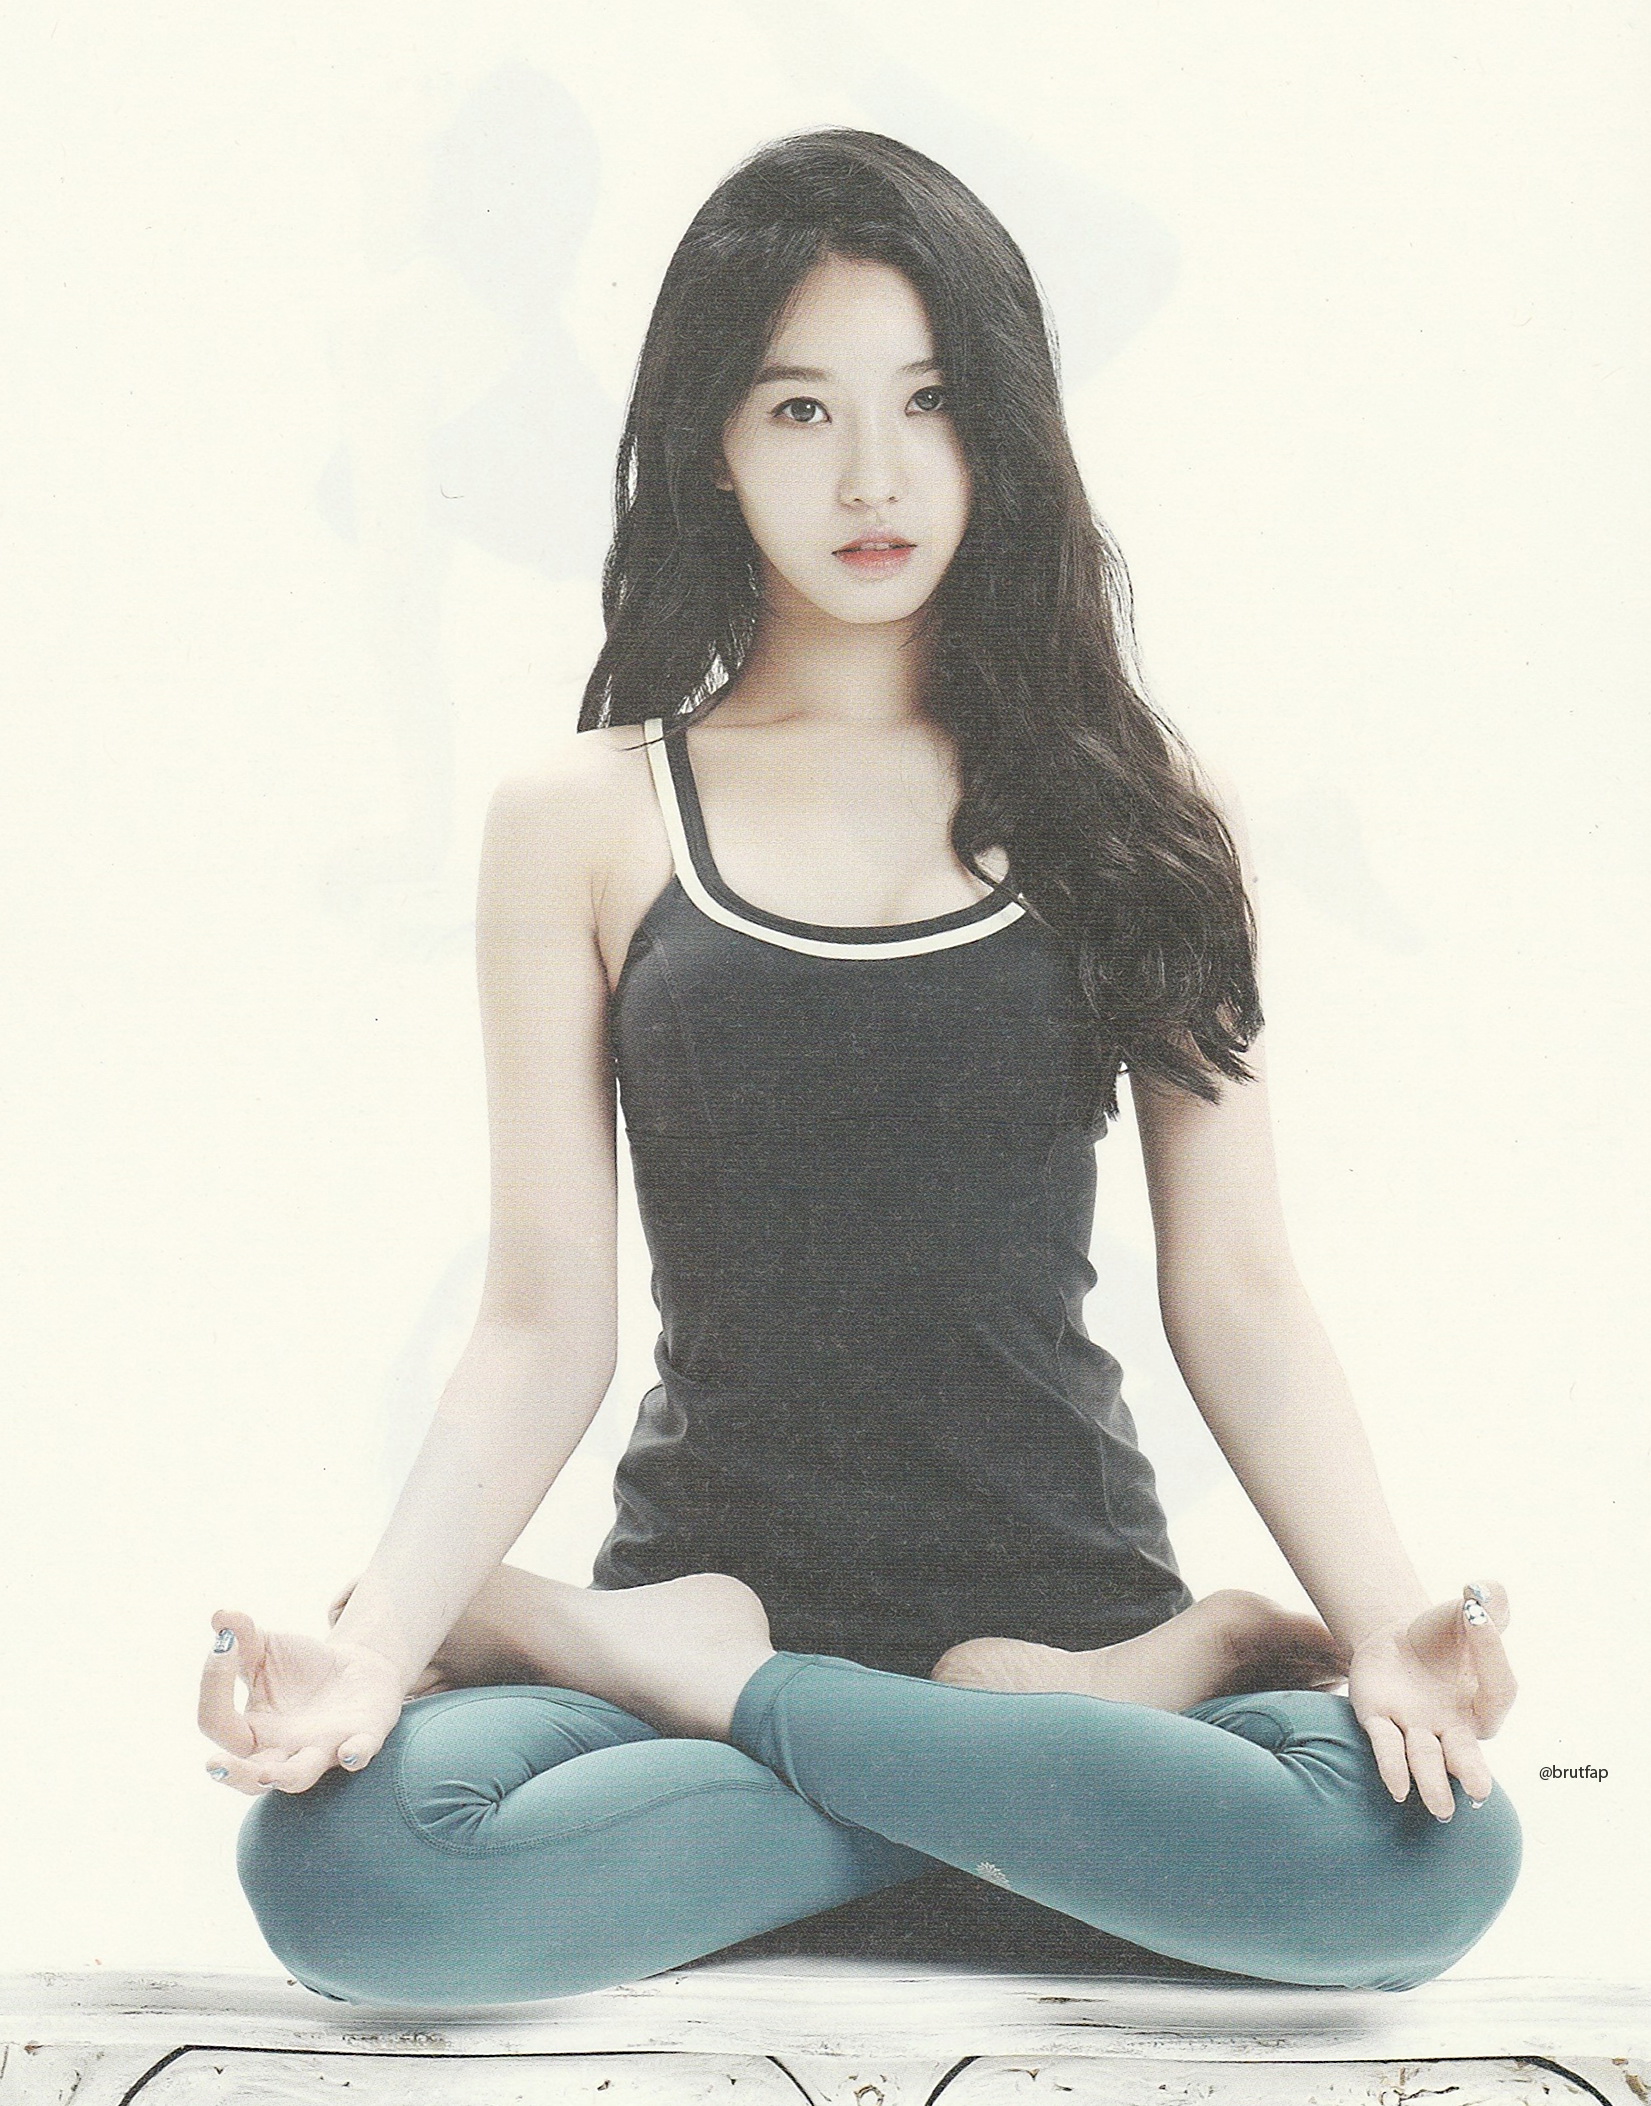 BESTie’s Dahye is extremely interested in showing you her yoga poses in